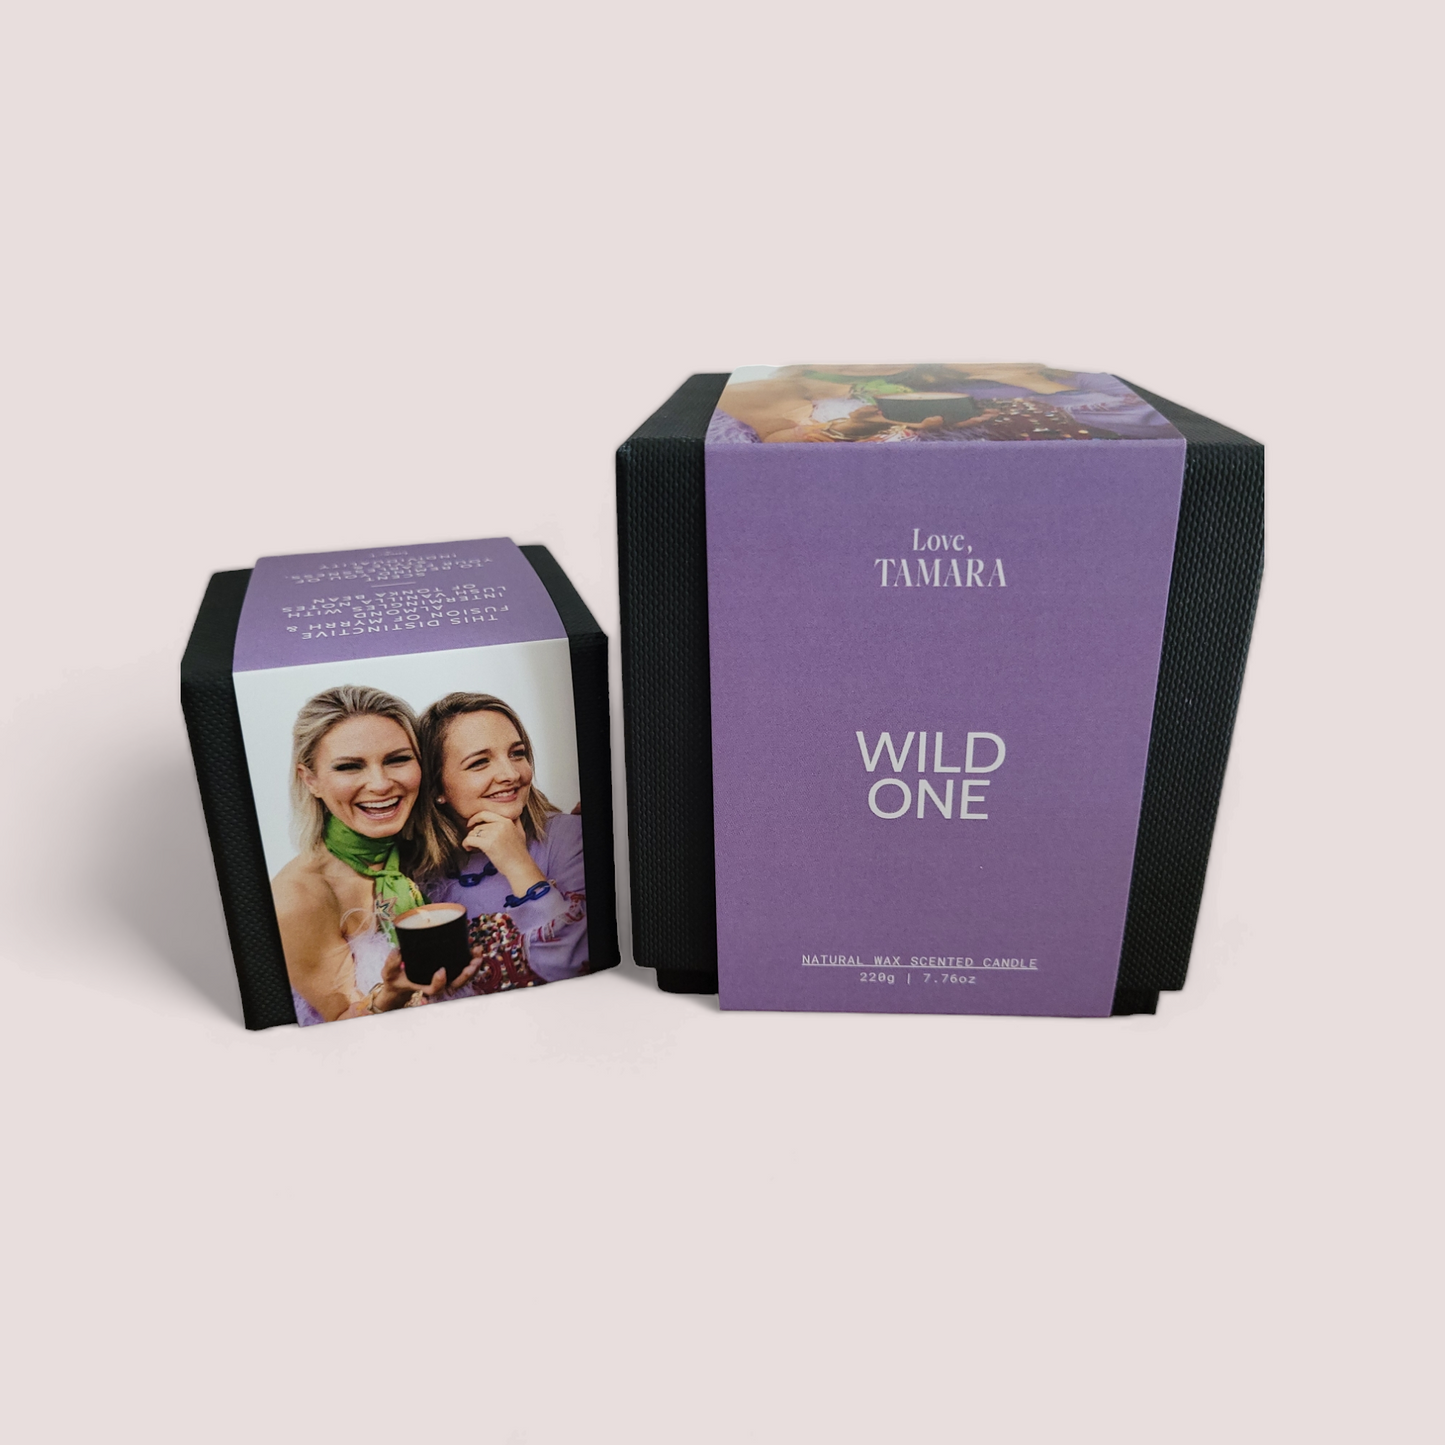 The Wild One Scented Candle